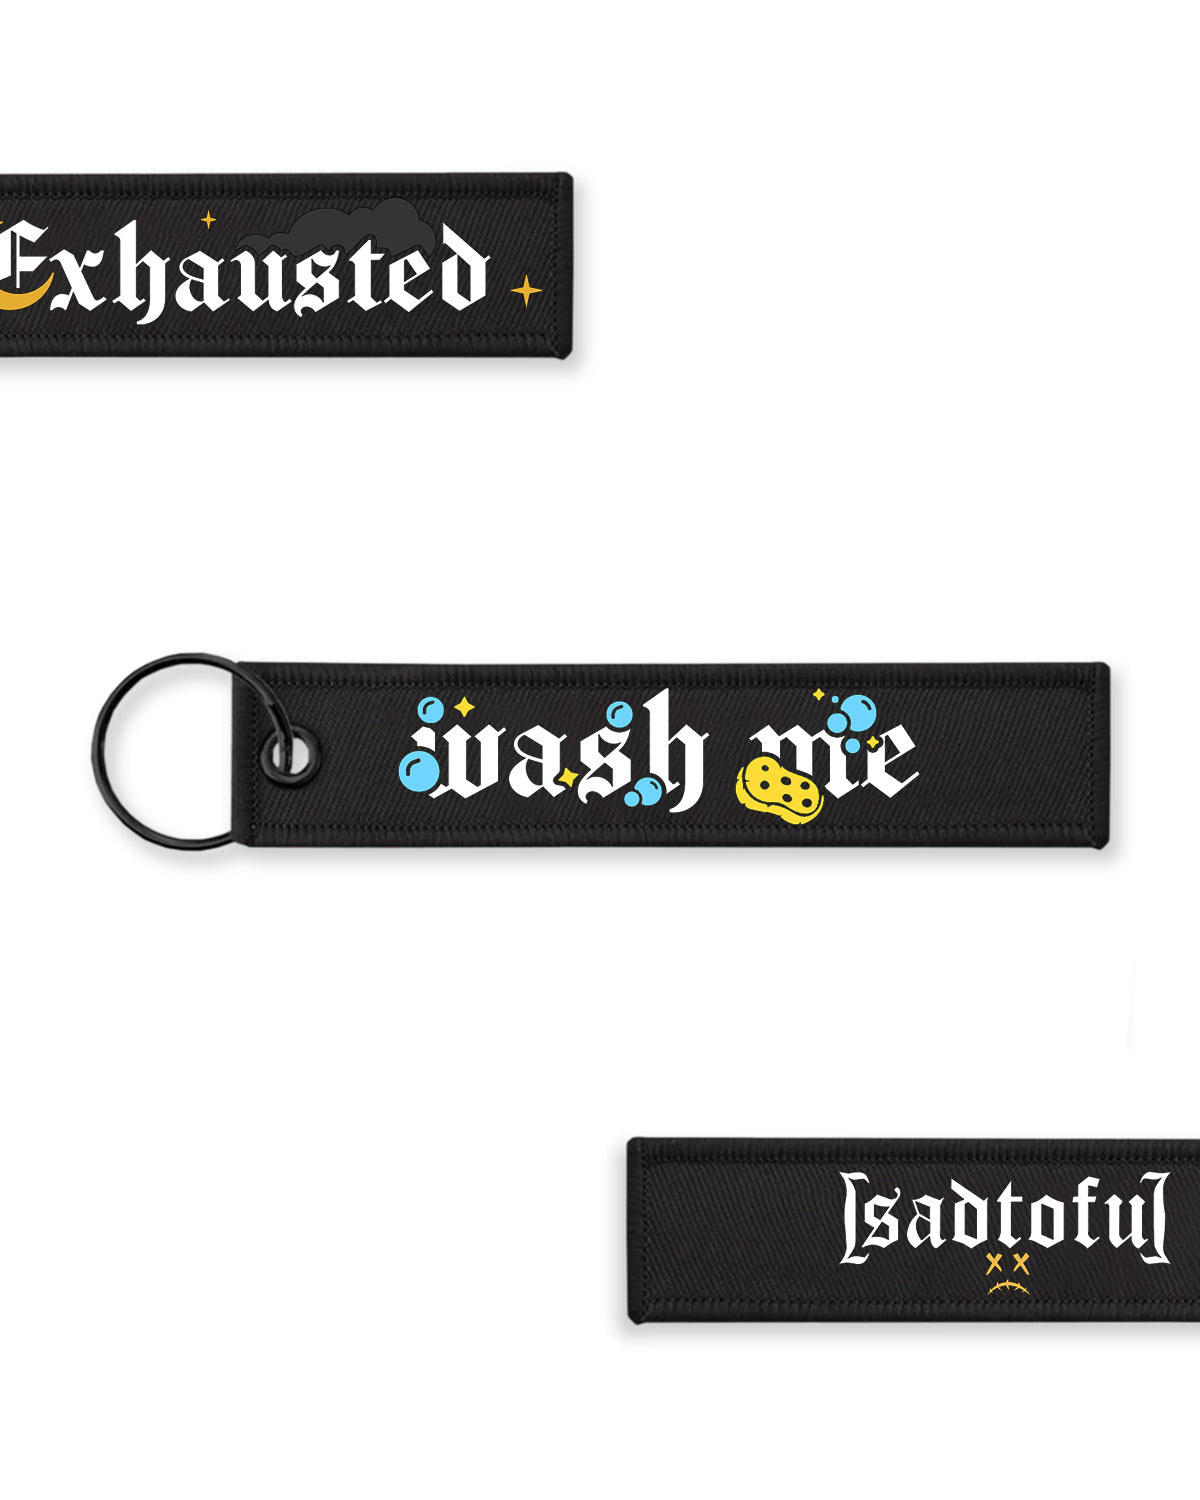 'Exhausted' Jet Tag